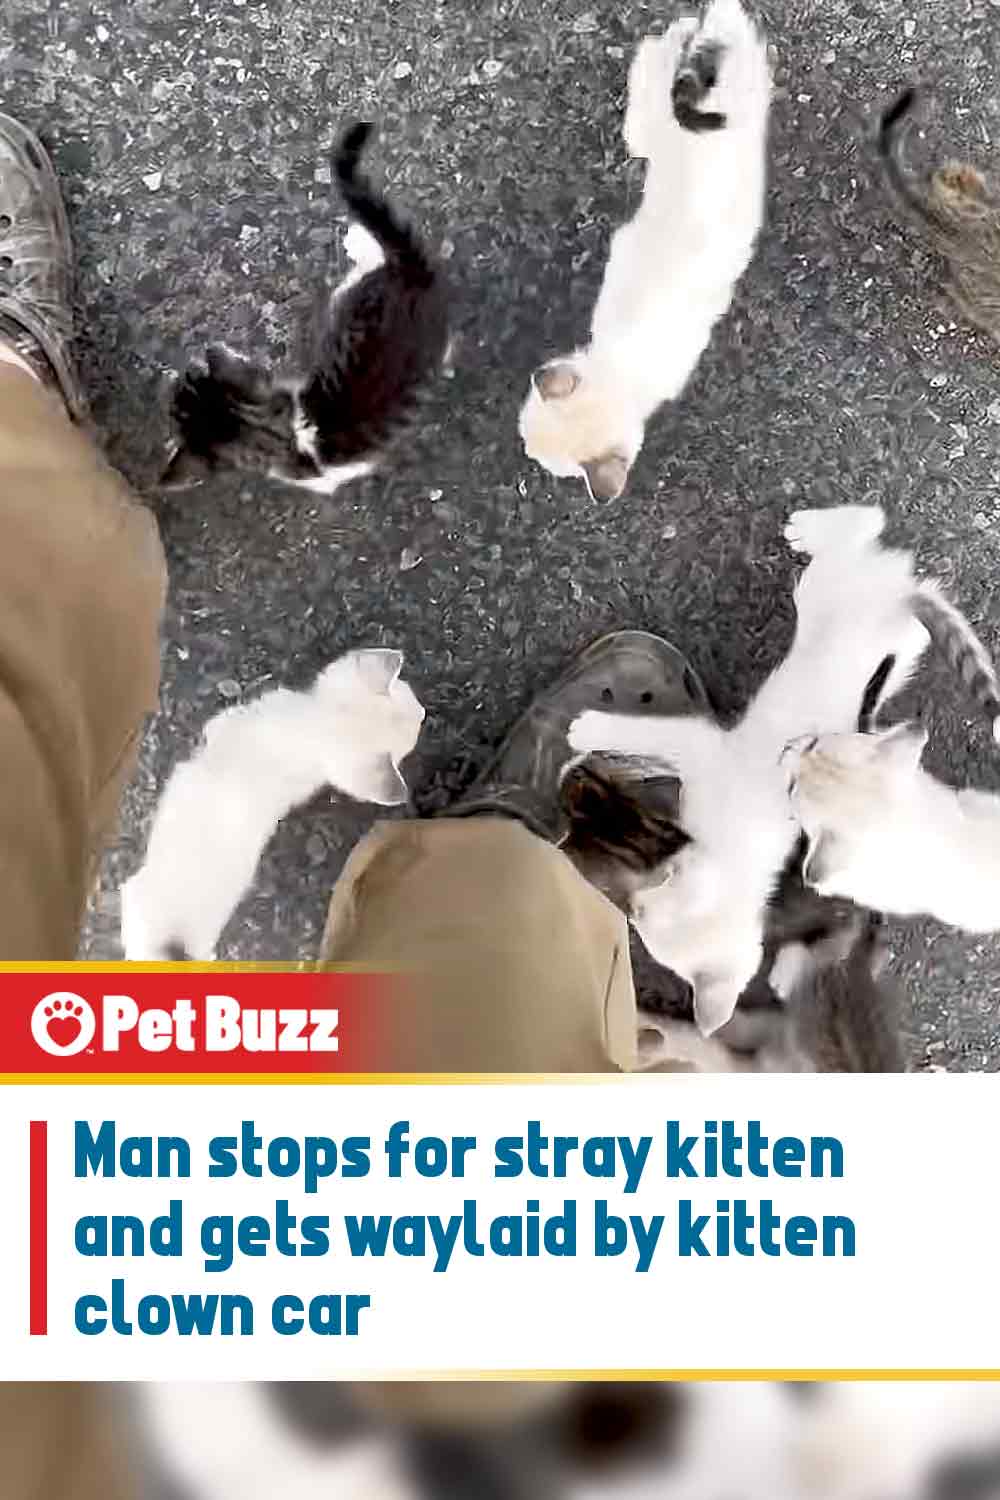 Man stops for stray kitten and gets waylaid by kitten clown car